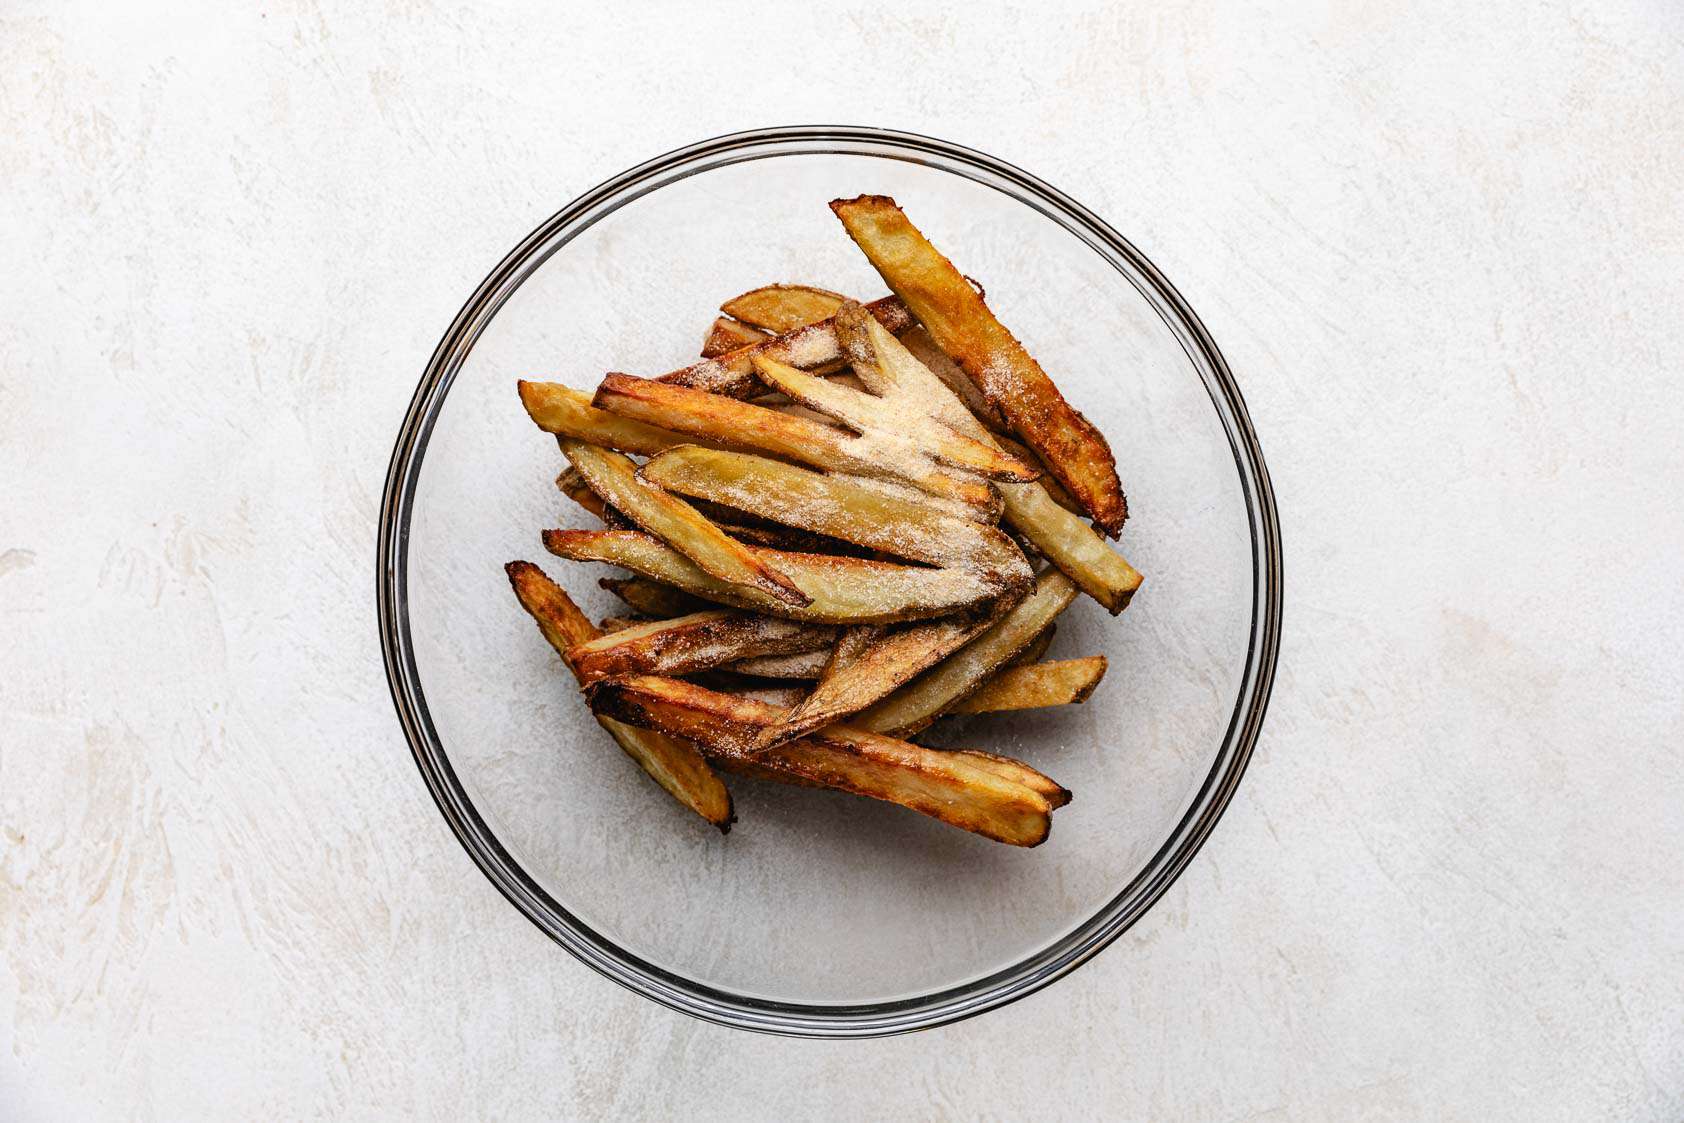 Baked fries with seasonings in a bowl.